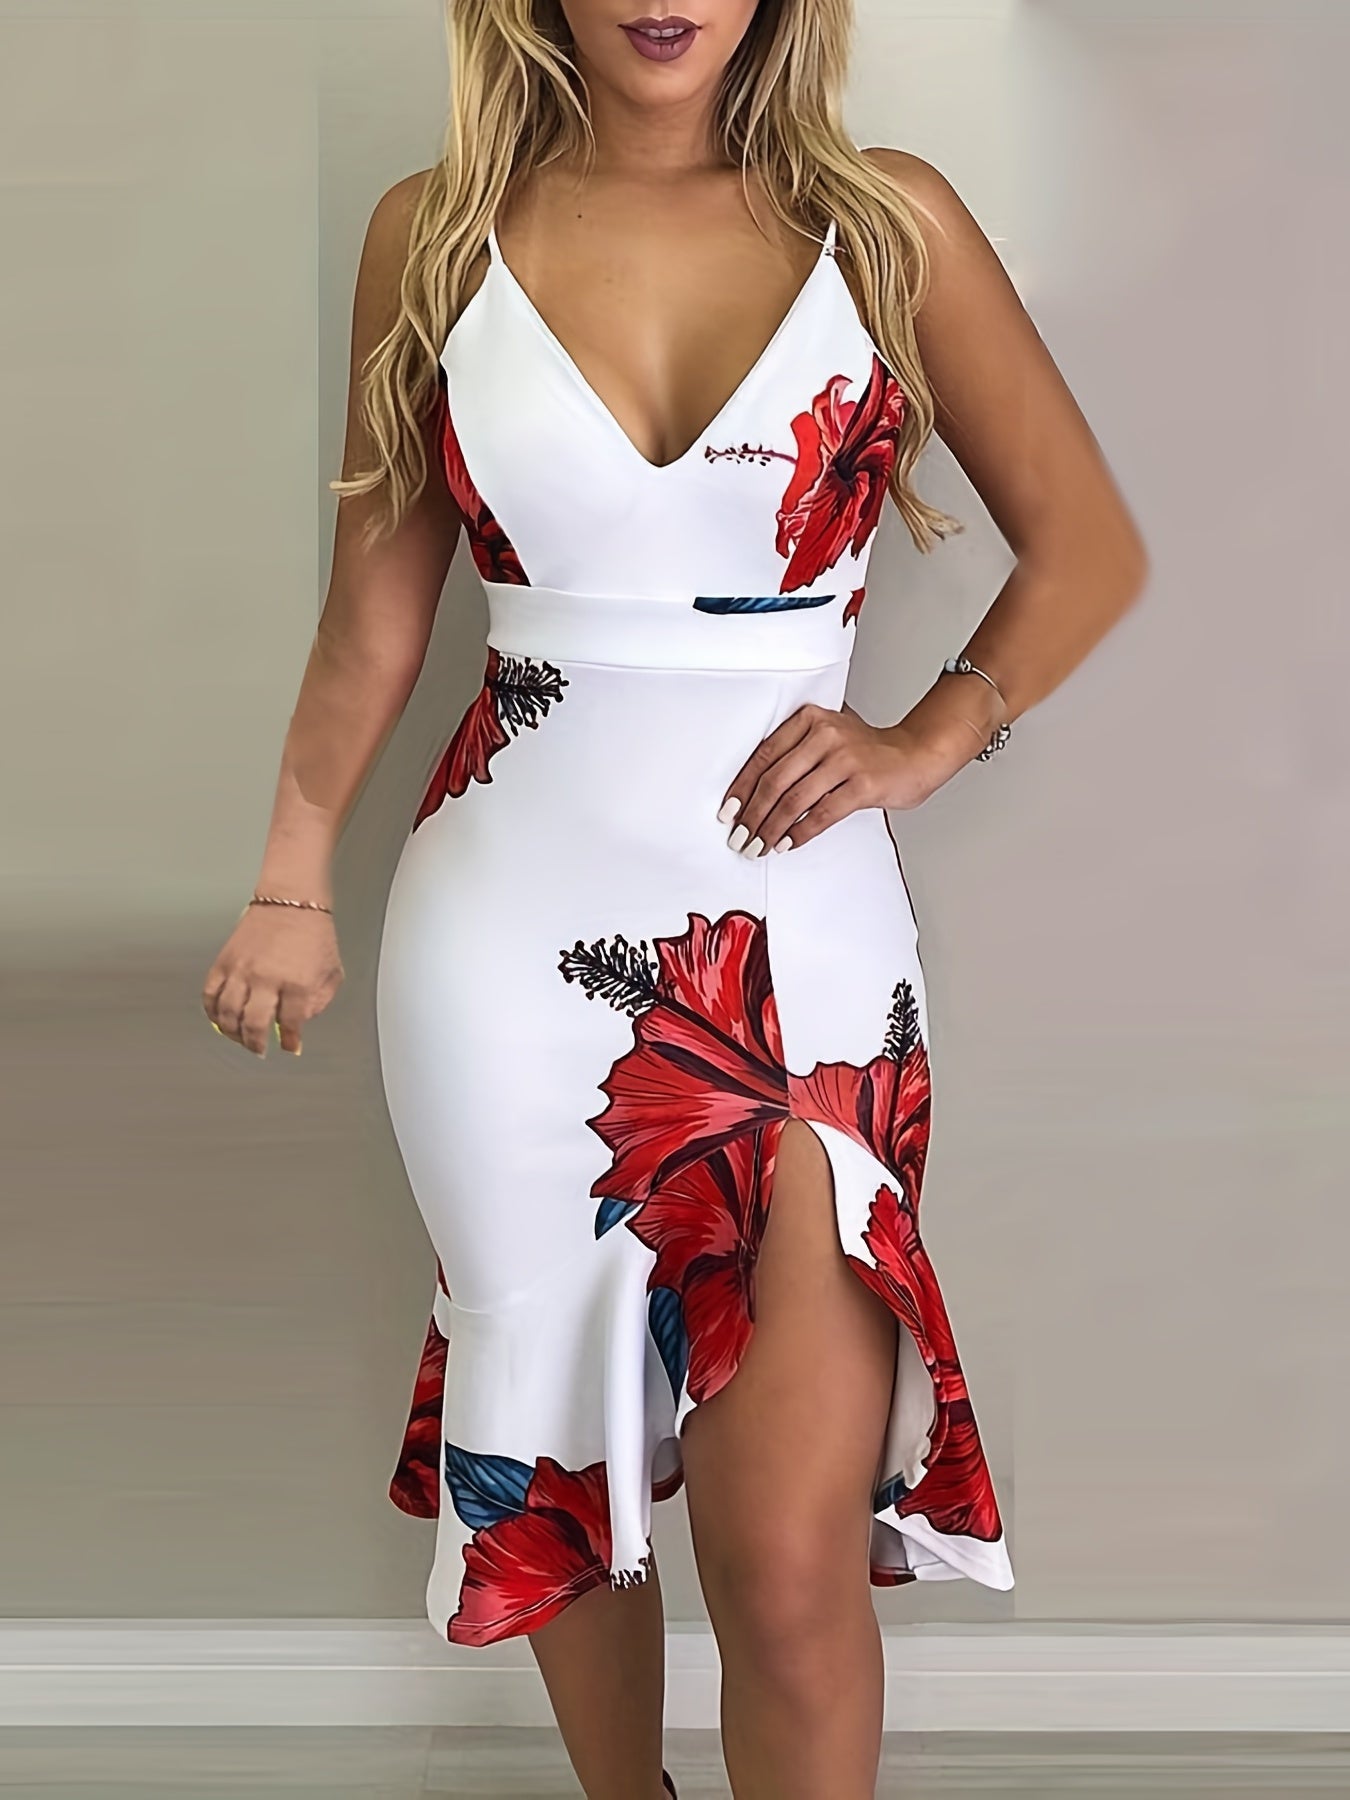 Spring/Summer Chic Floral Bodycon Dress - Sexy V Neck with Asymmetrical Ruffle Hem, Durable Stretch Knit Fabric & Spaghetti Straps